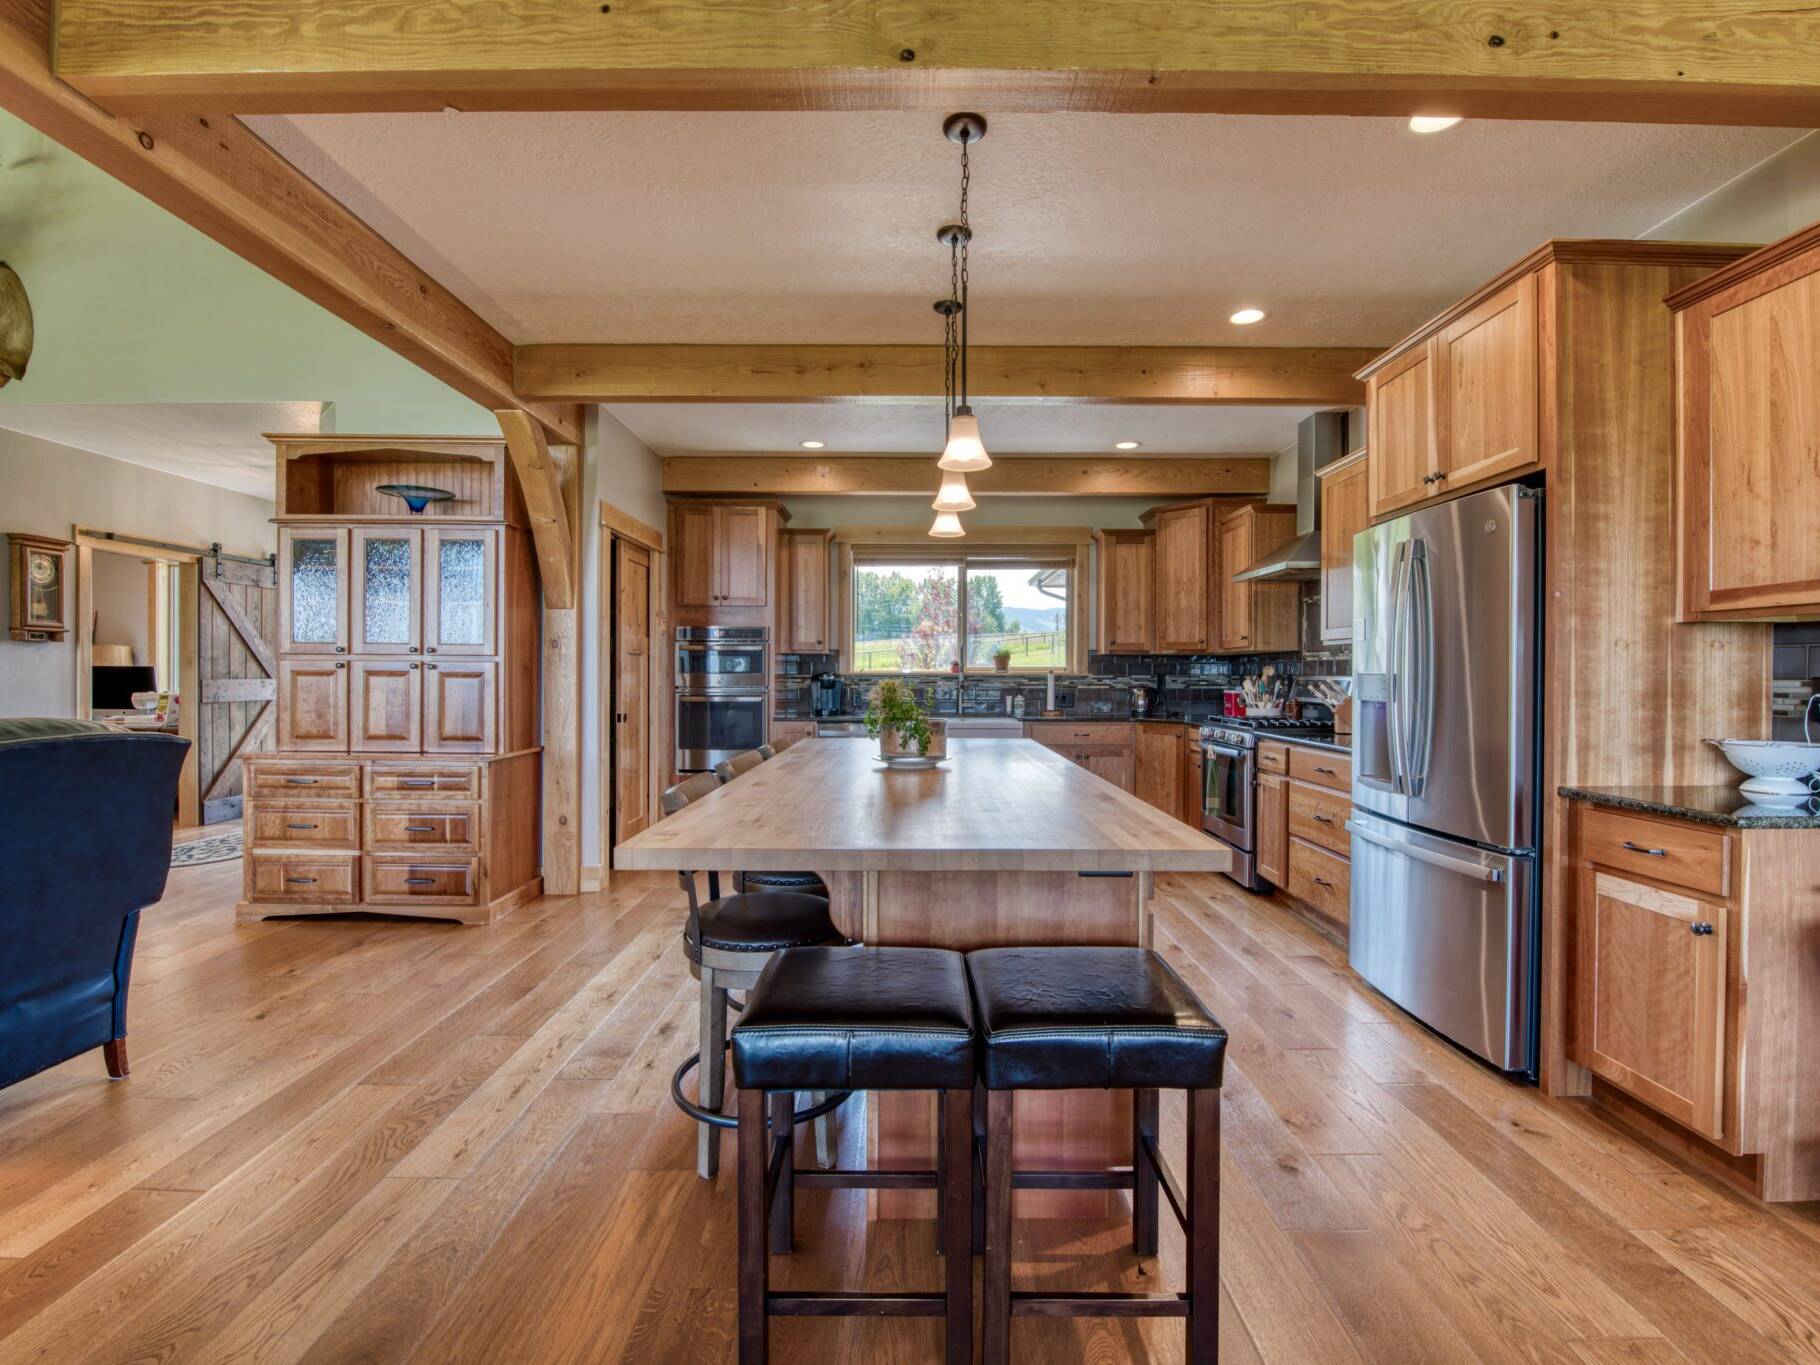 Kitchen with butcher block island countertop and wood beam work in a custom home built by Big Sky Builders in Stevensville, MT